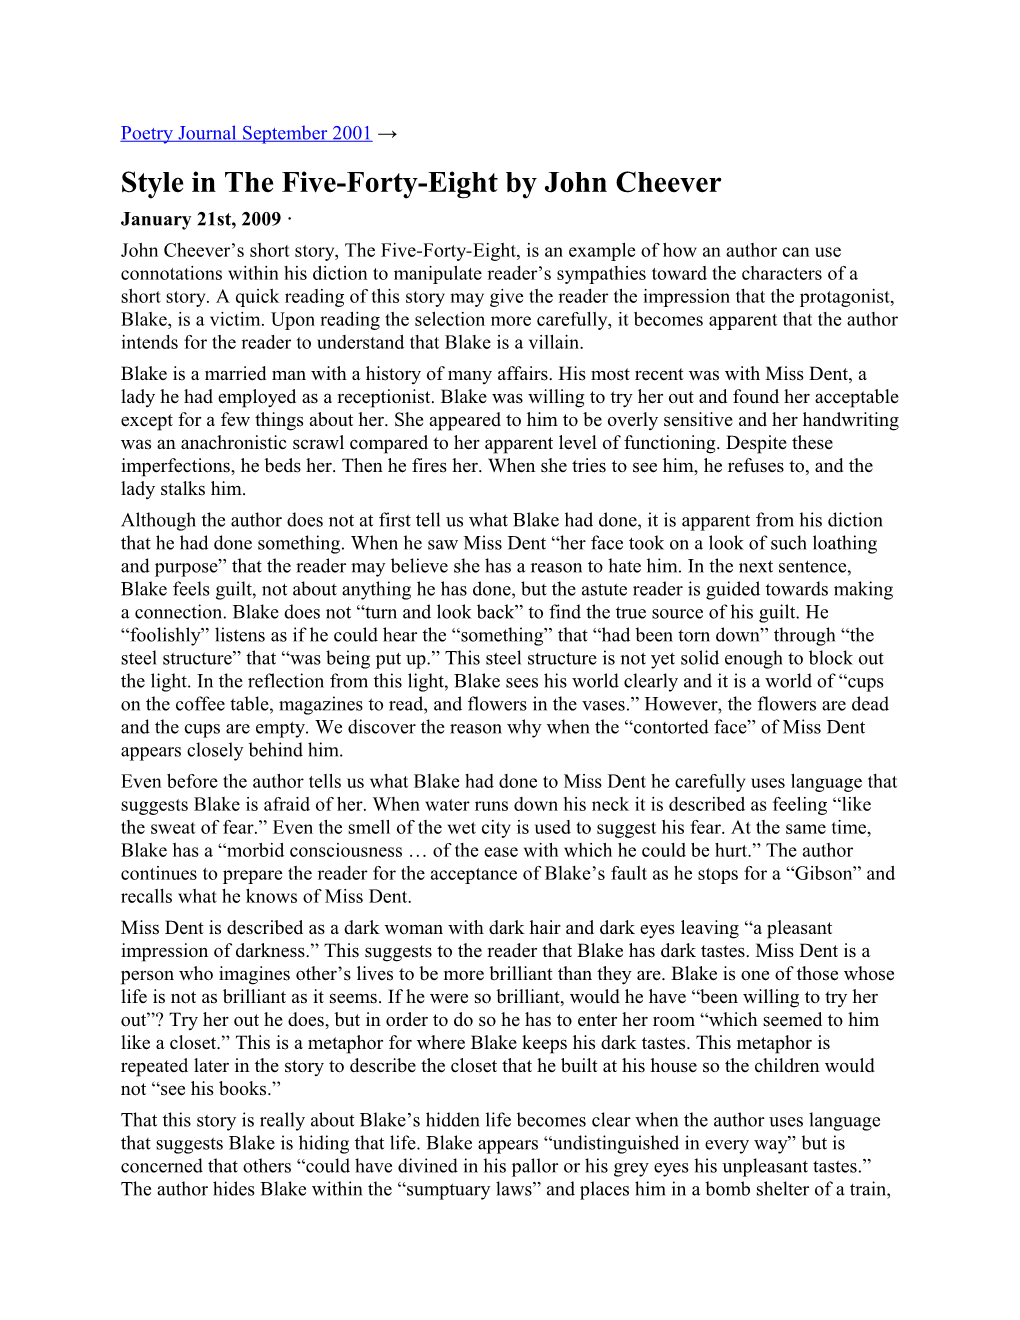 Style in the Five-Forty-Eight by John Cheever